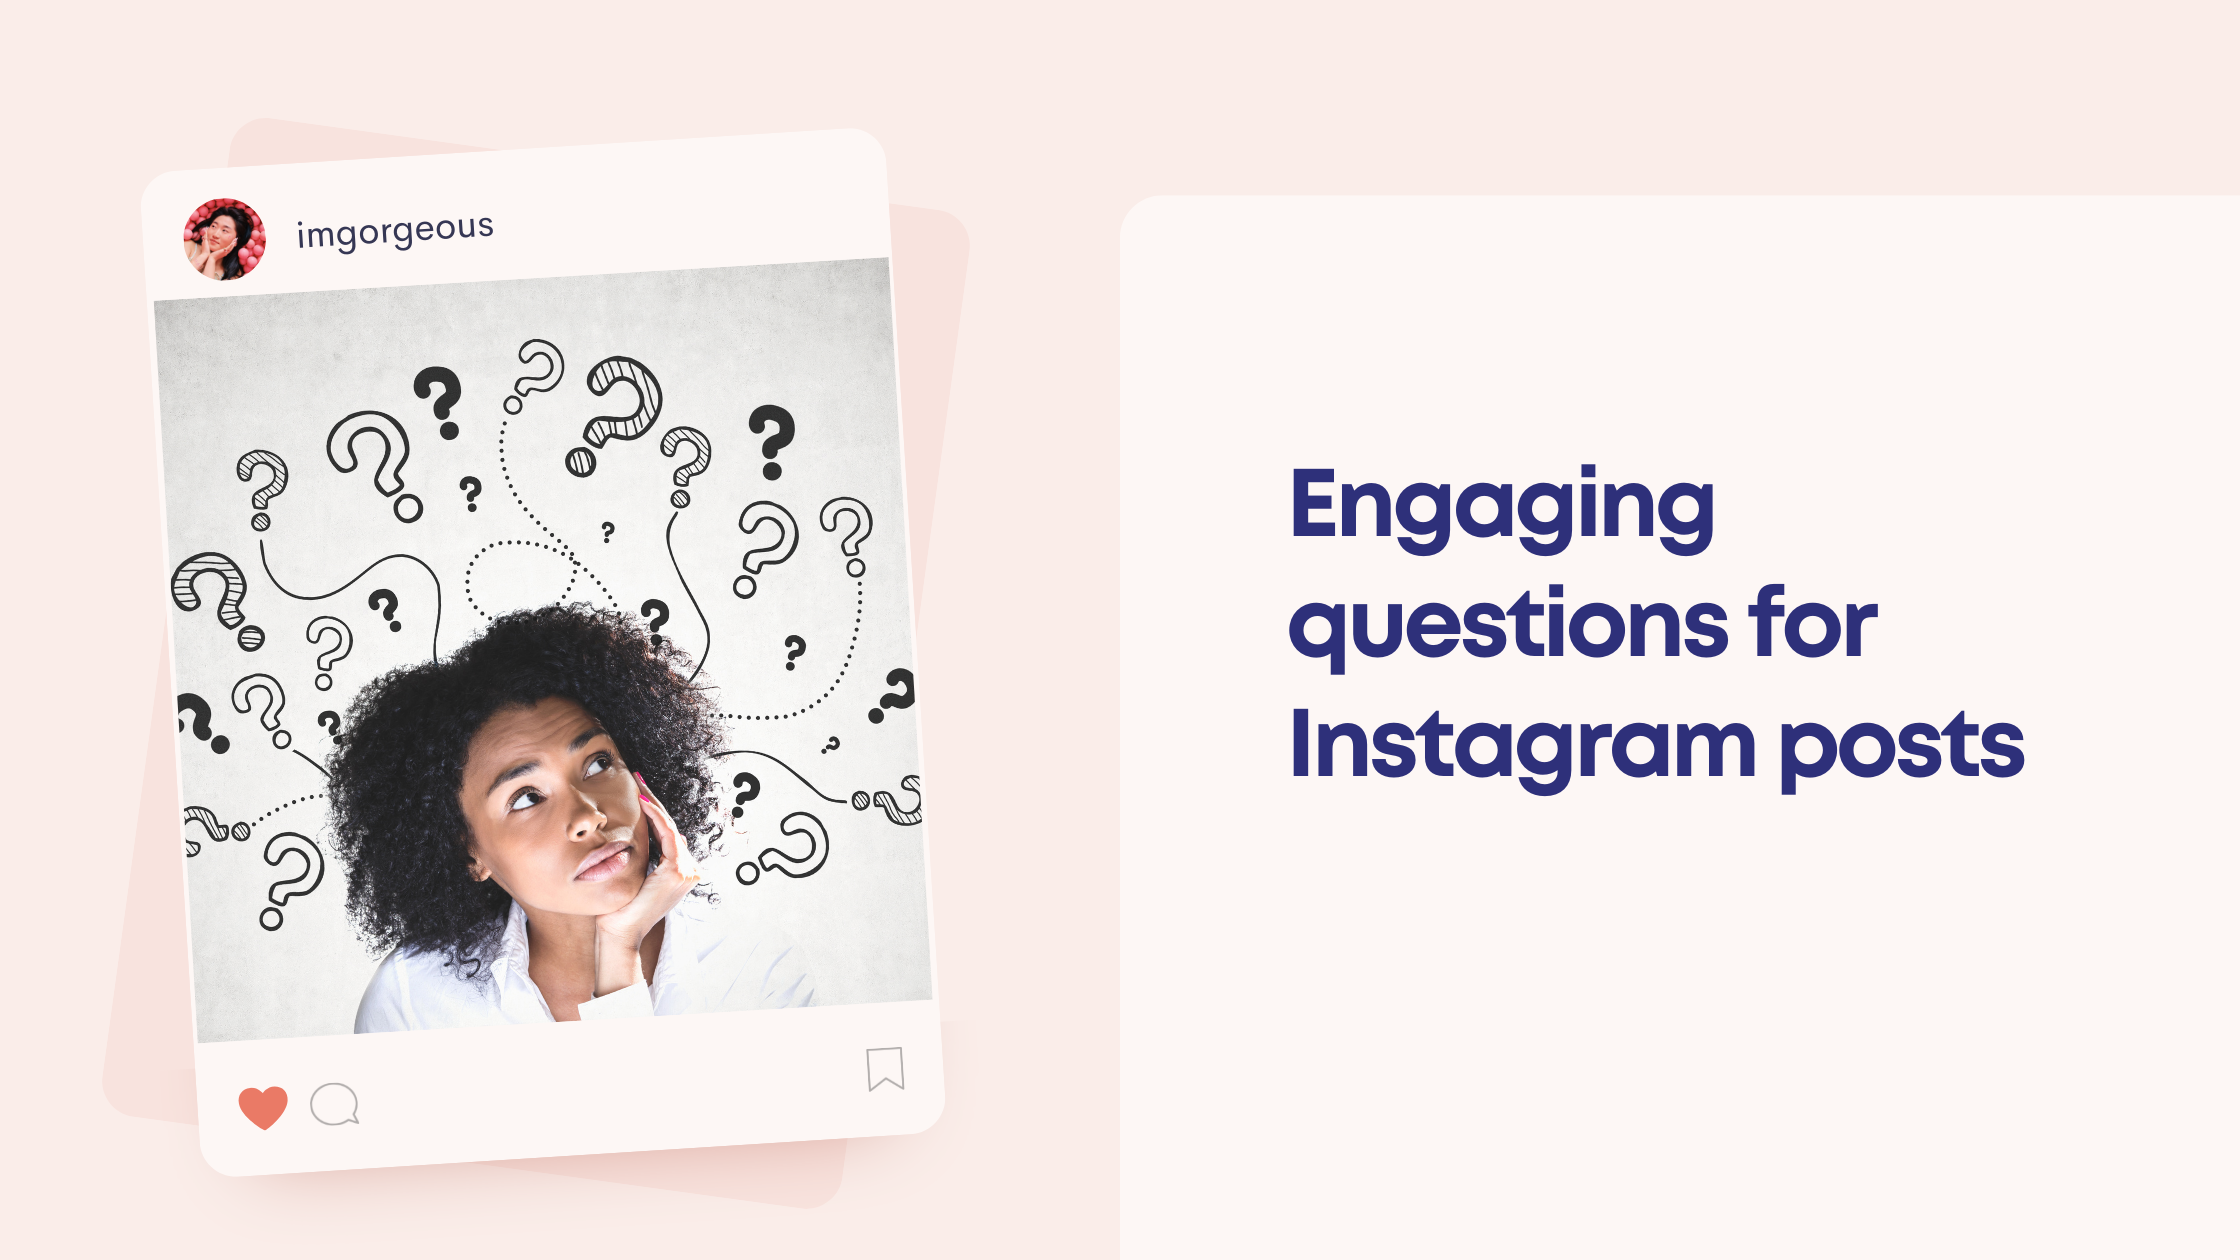 Remote.tools share engaging questions for Instagram post